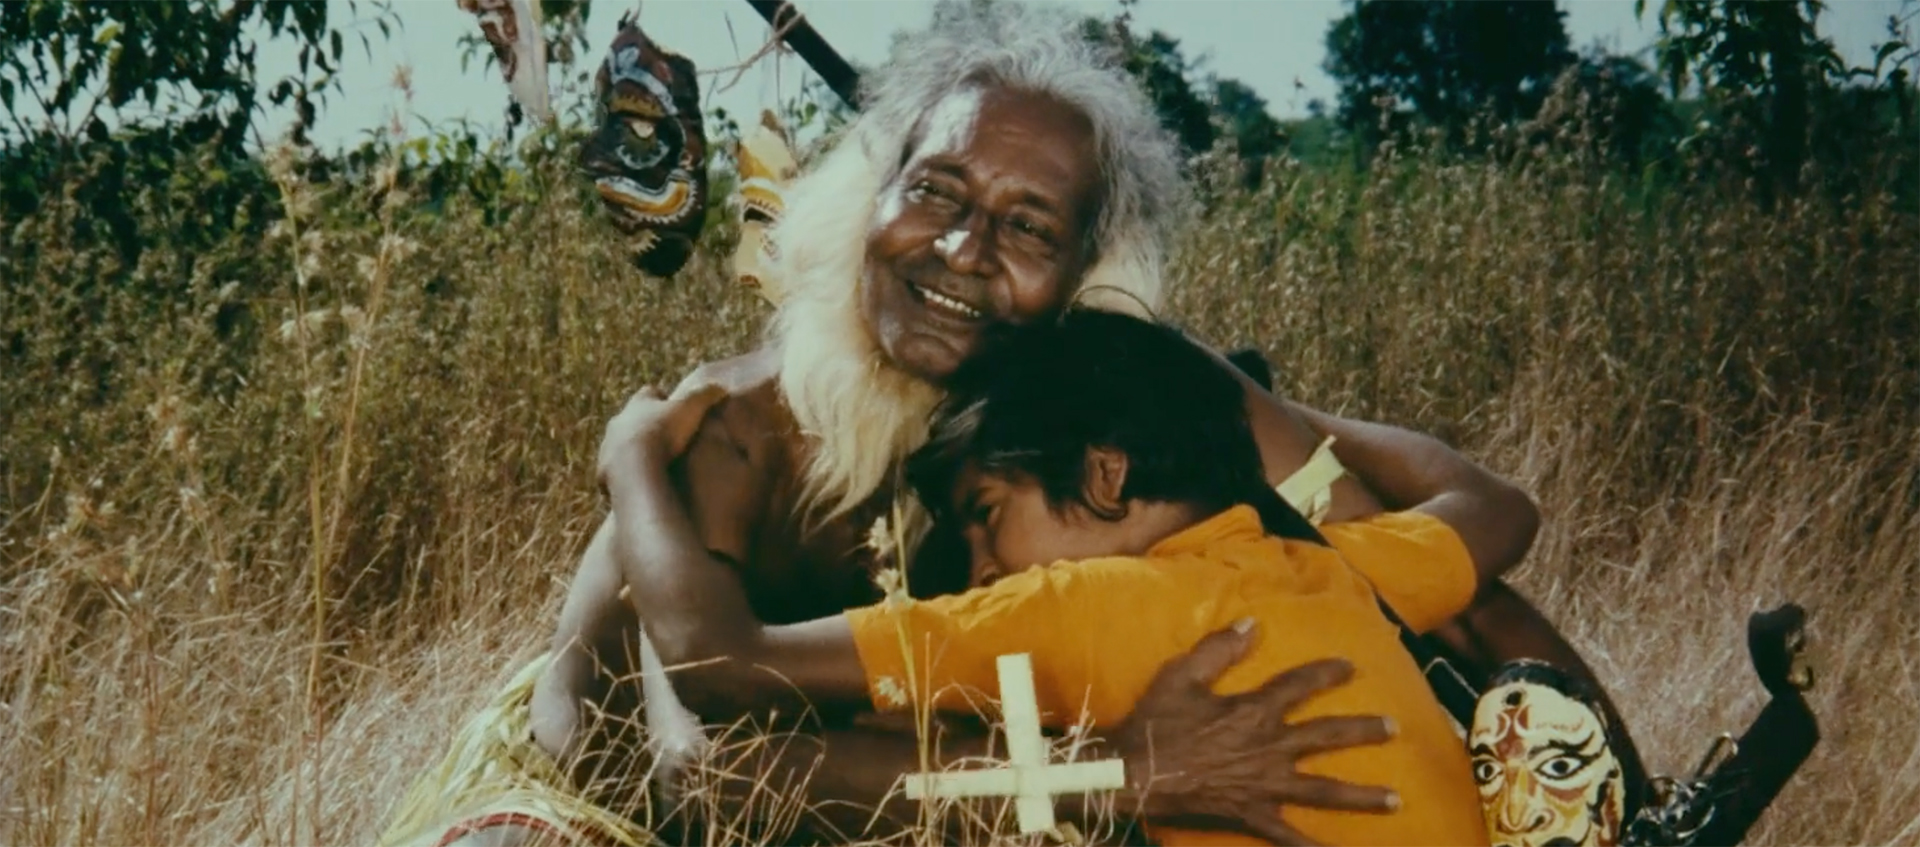 An elder with white hair smiles and holds a young child in a yellow shirt. A cross sits in front of them as they both sit in a field